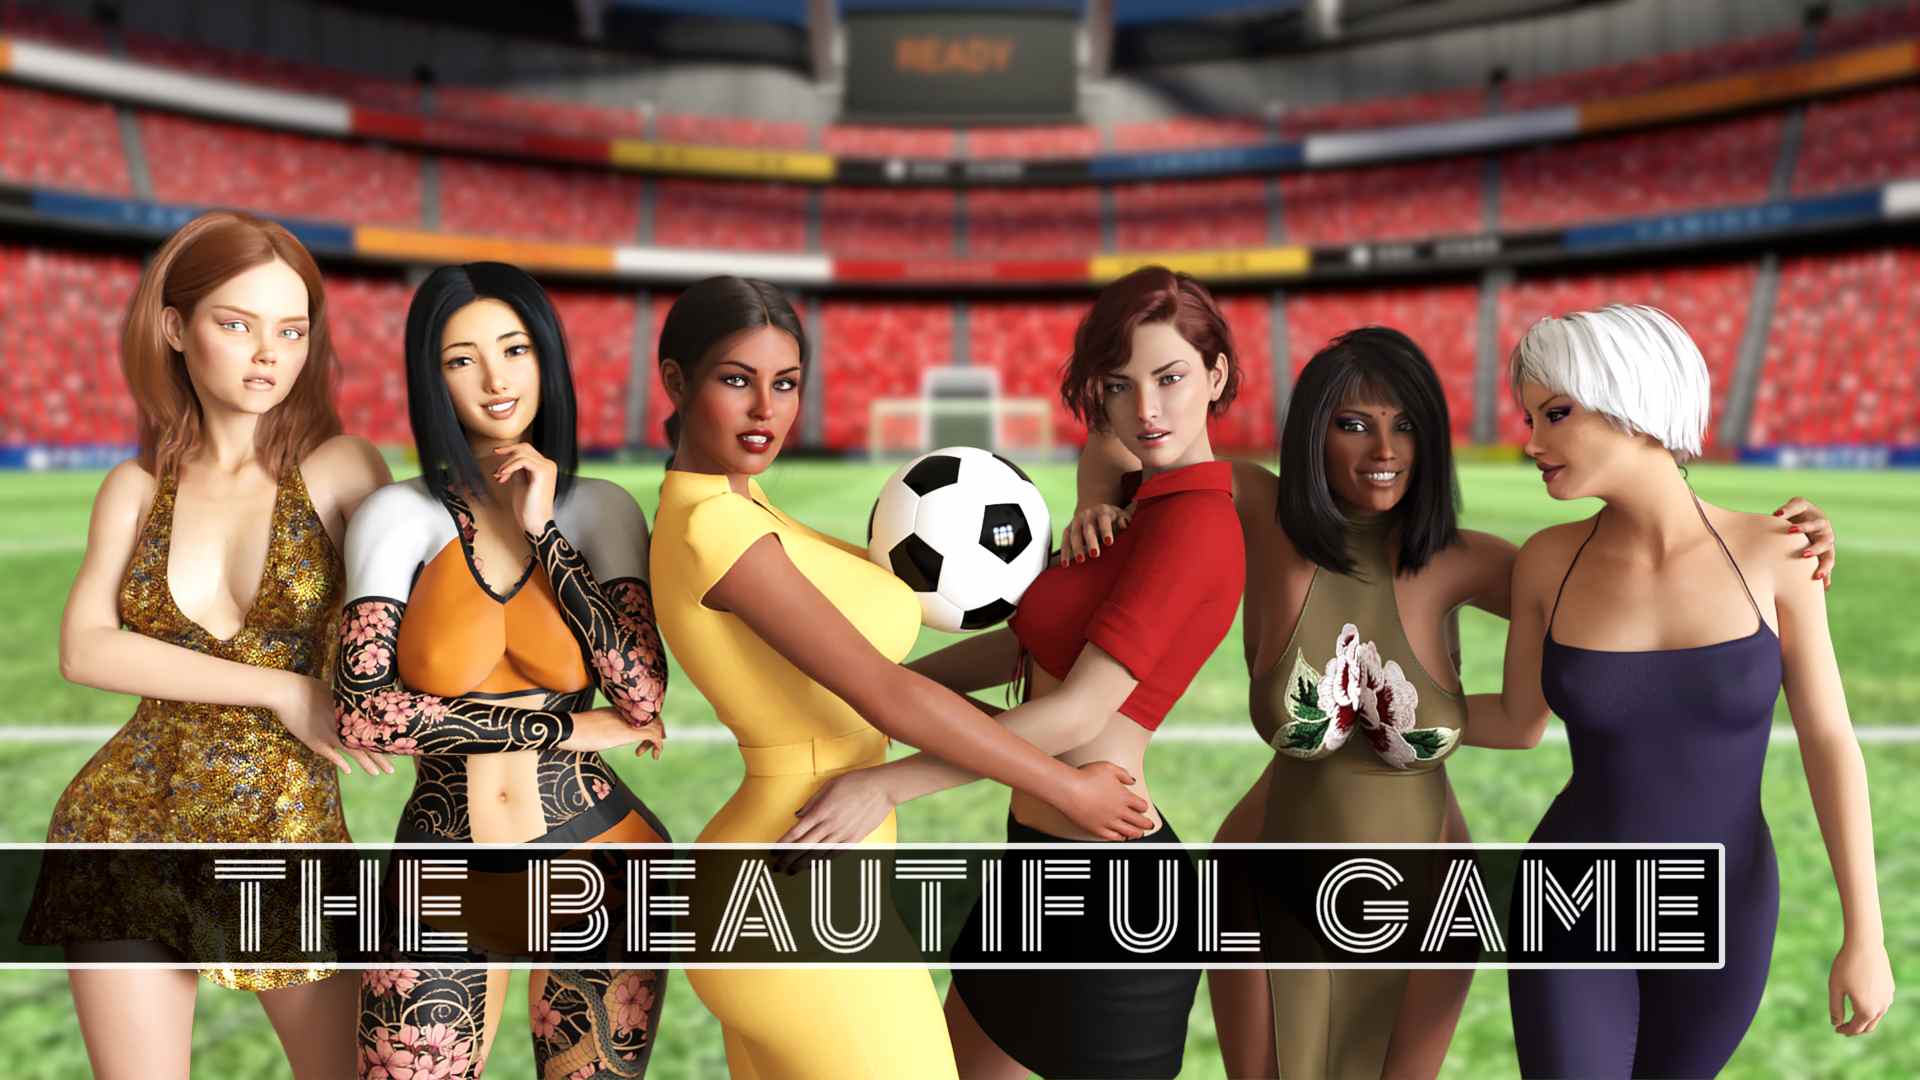 The Beautiful Game [Daggum] Adult xxx Game Download